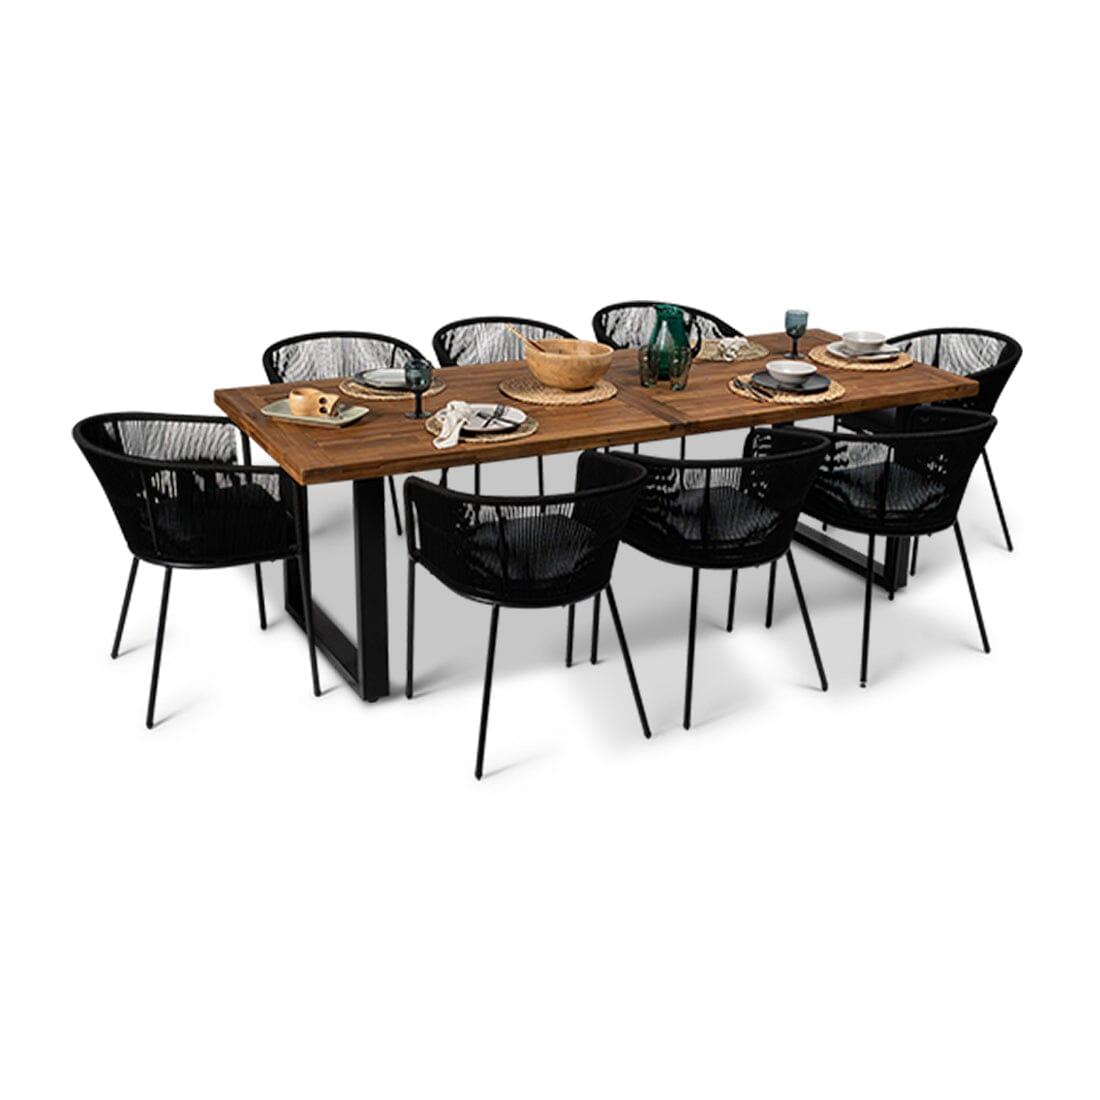 Hali Solid Wood Garden Dining Set - With Rope Chairs